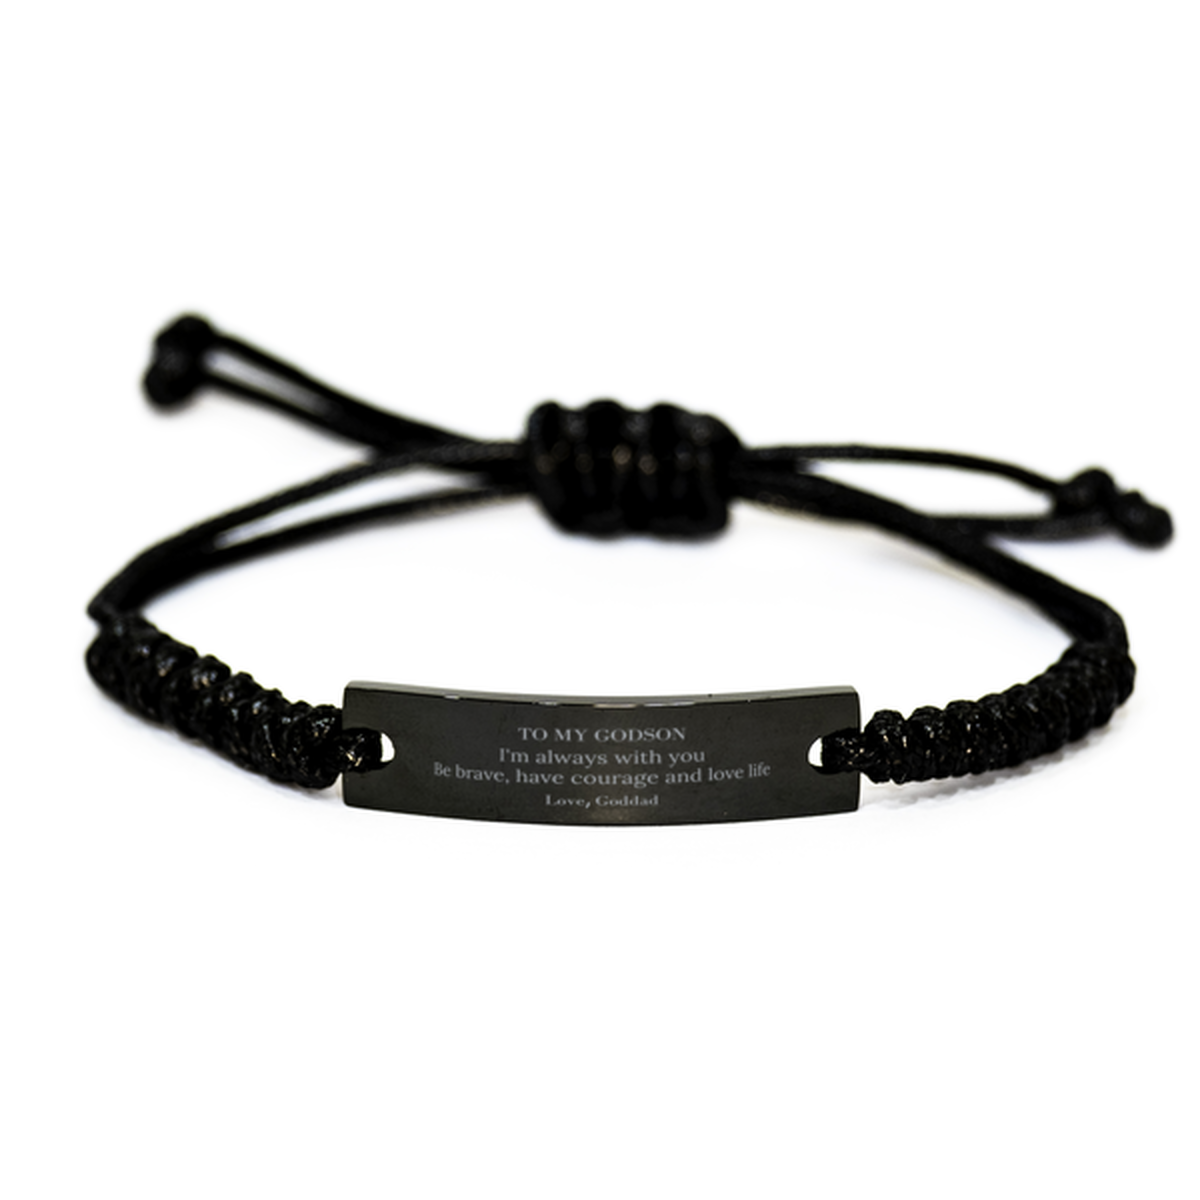 To My Godson Gifts from Goddad, Unique Black Rope Bracelet Inspirational Christmas Birthday Graduation Gifts for Godson I'm always with you. Be brave, have courage and love life. Love, Goddad